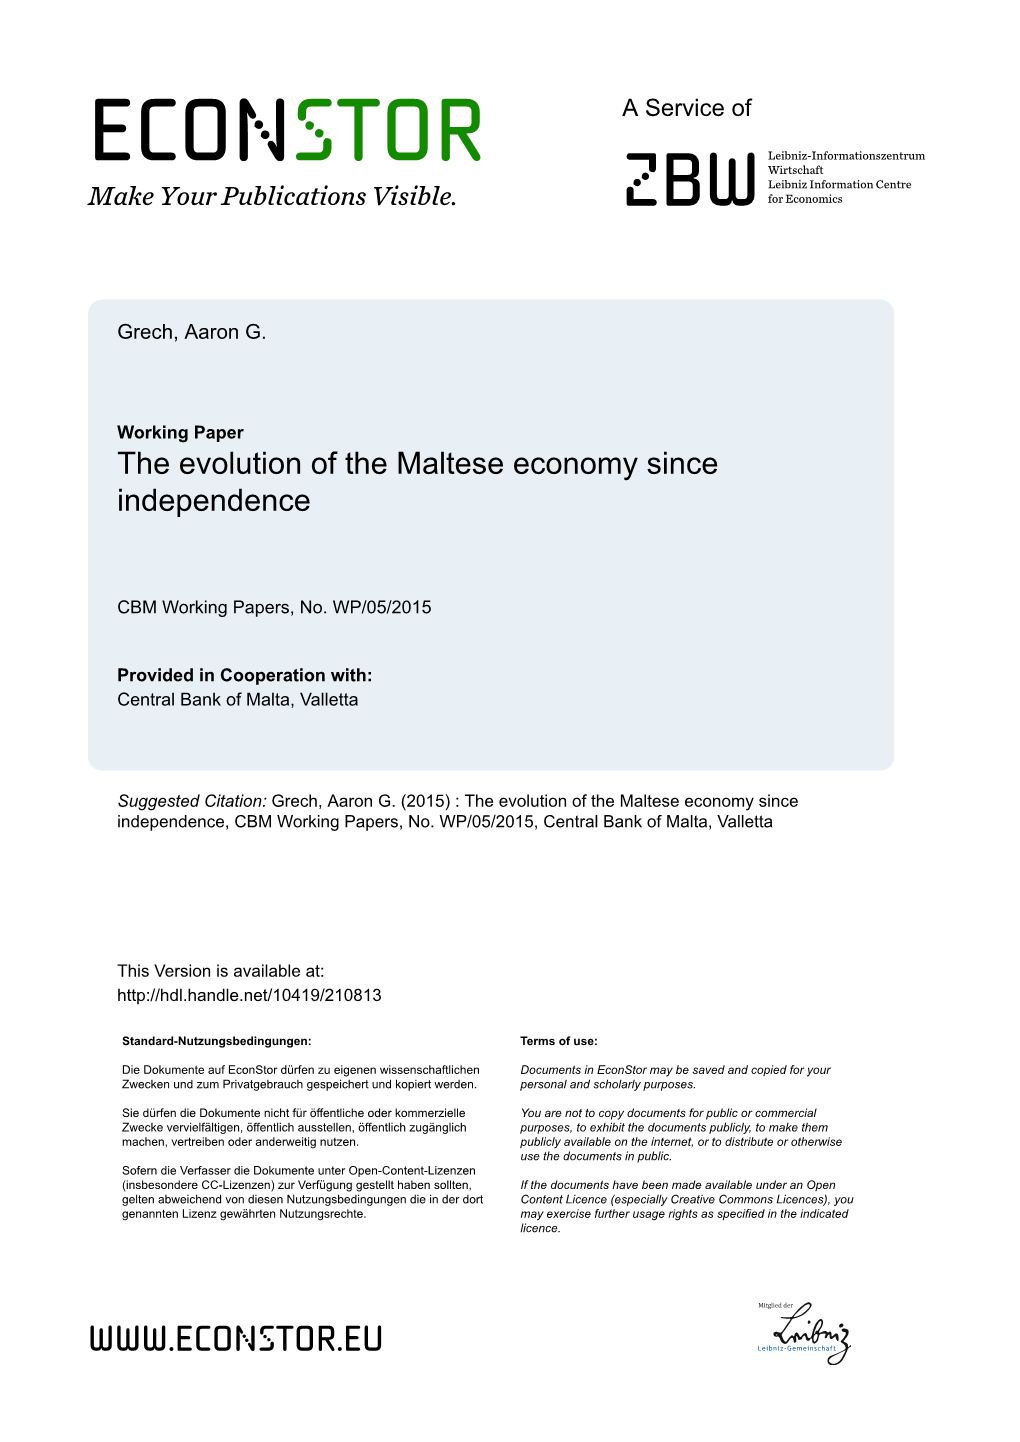 The Evolution of the Maltese Economy Since Independence